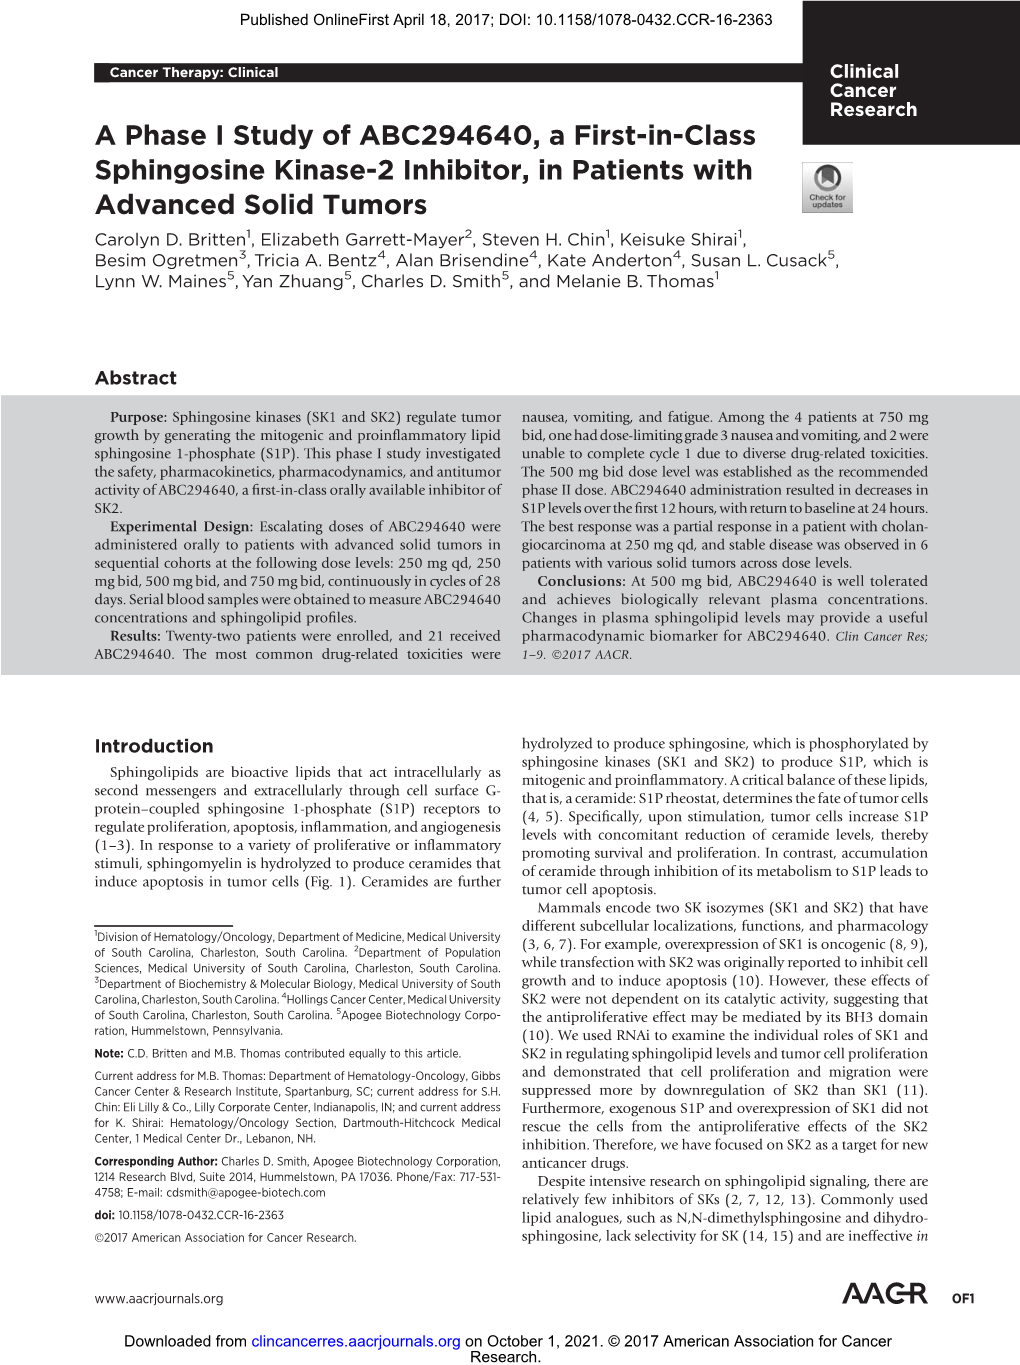 A Phase I Study of ABC294640, a First-In-Class Sphingosine Kinase-2 Inhibitor, in Patients with Advanced Solid Tumors Carolyn D